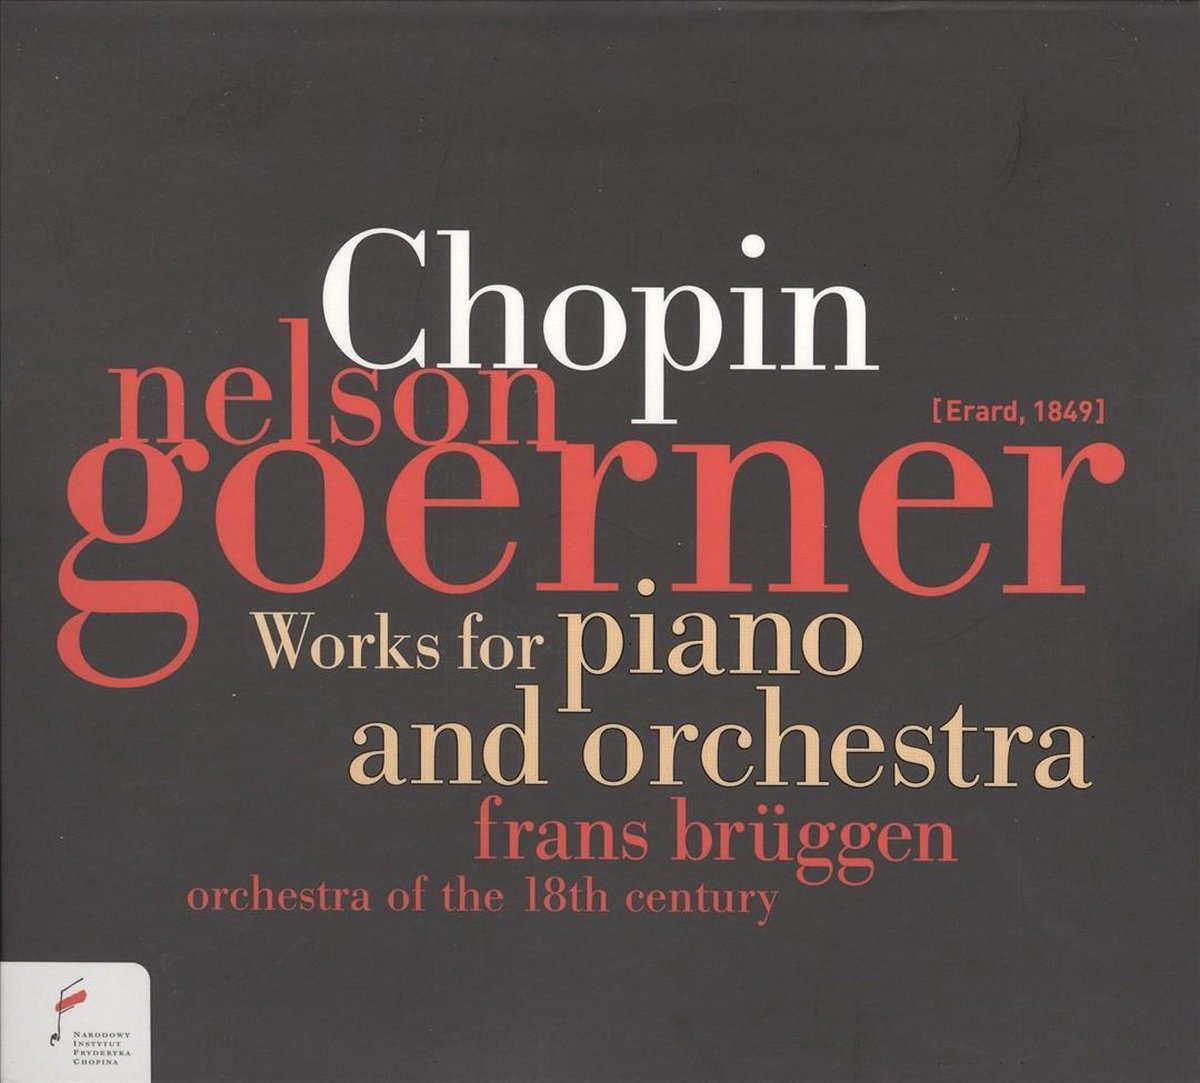 Goerner/Orchestra Of The 18th Centu - Works For Piano And Orchestra - Nelson Goerner